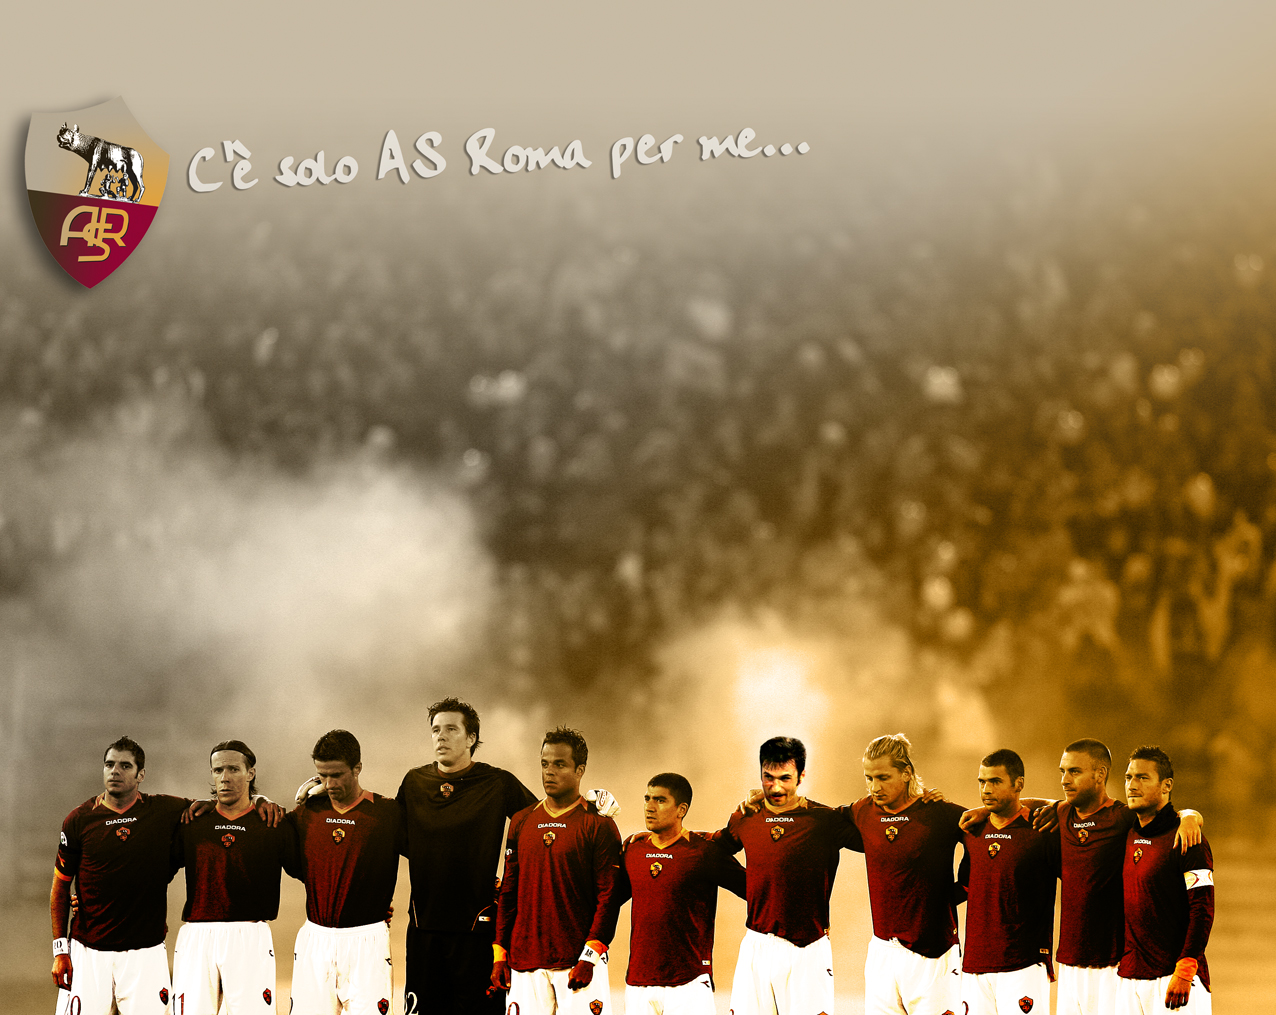 Free Download World Cup 10 South Africa As Roma Logo Wallpaper 1276x1015 For Your Desktop Mobile Tablet Explore 47 Villa Roma Wallpaper Villa Roma Wallpaper Roma Background Roma Wallpaper